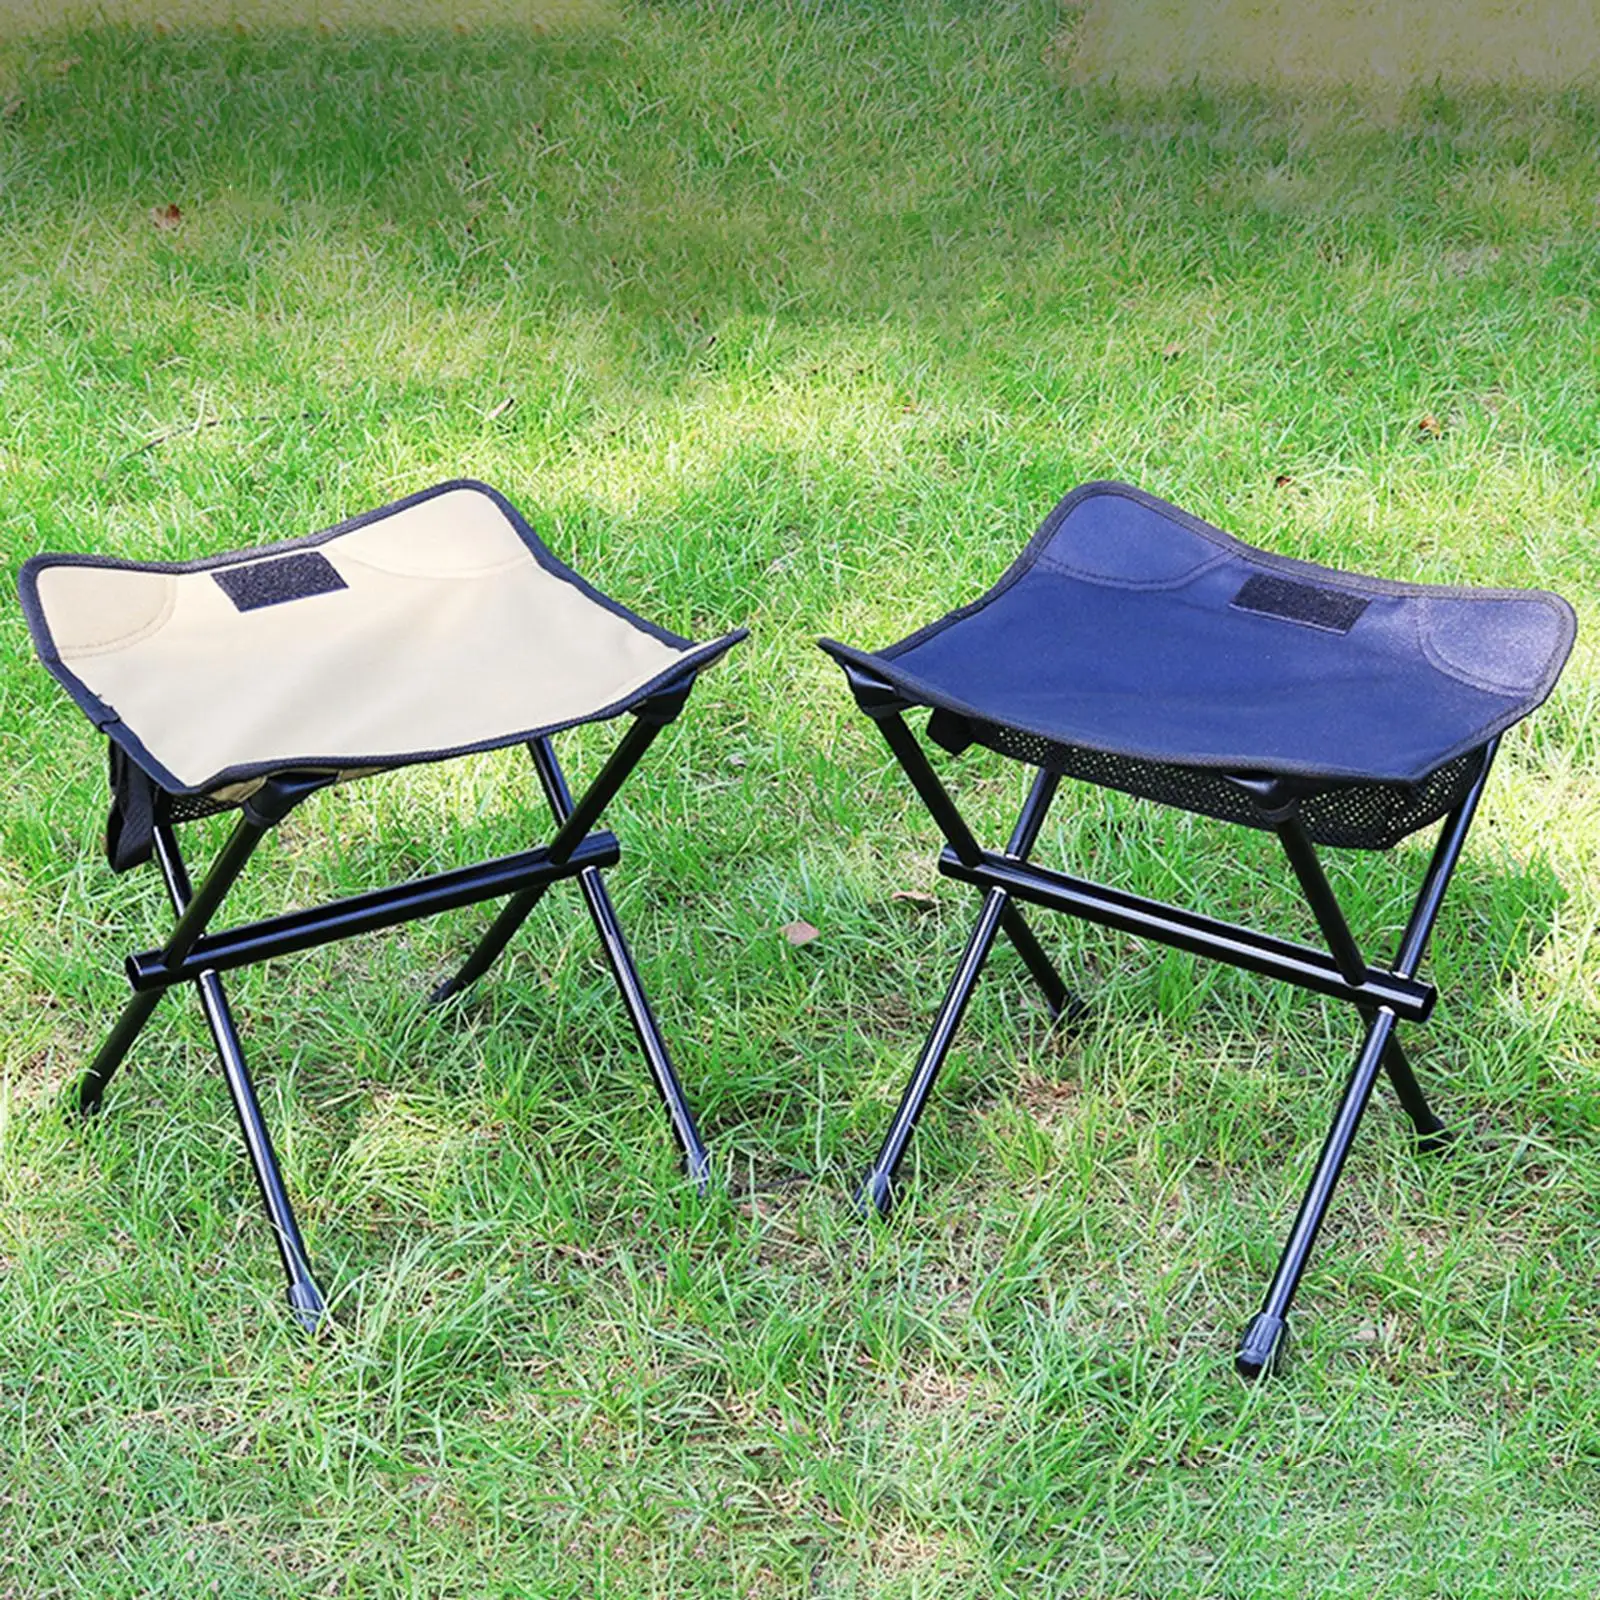 Outdoor Folding Chair Foldable Camping Stool Collapsible Stool Hiking Fishing - £20.26 GBP